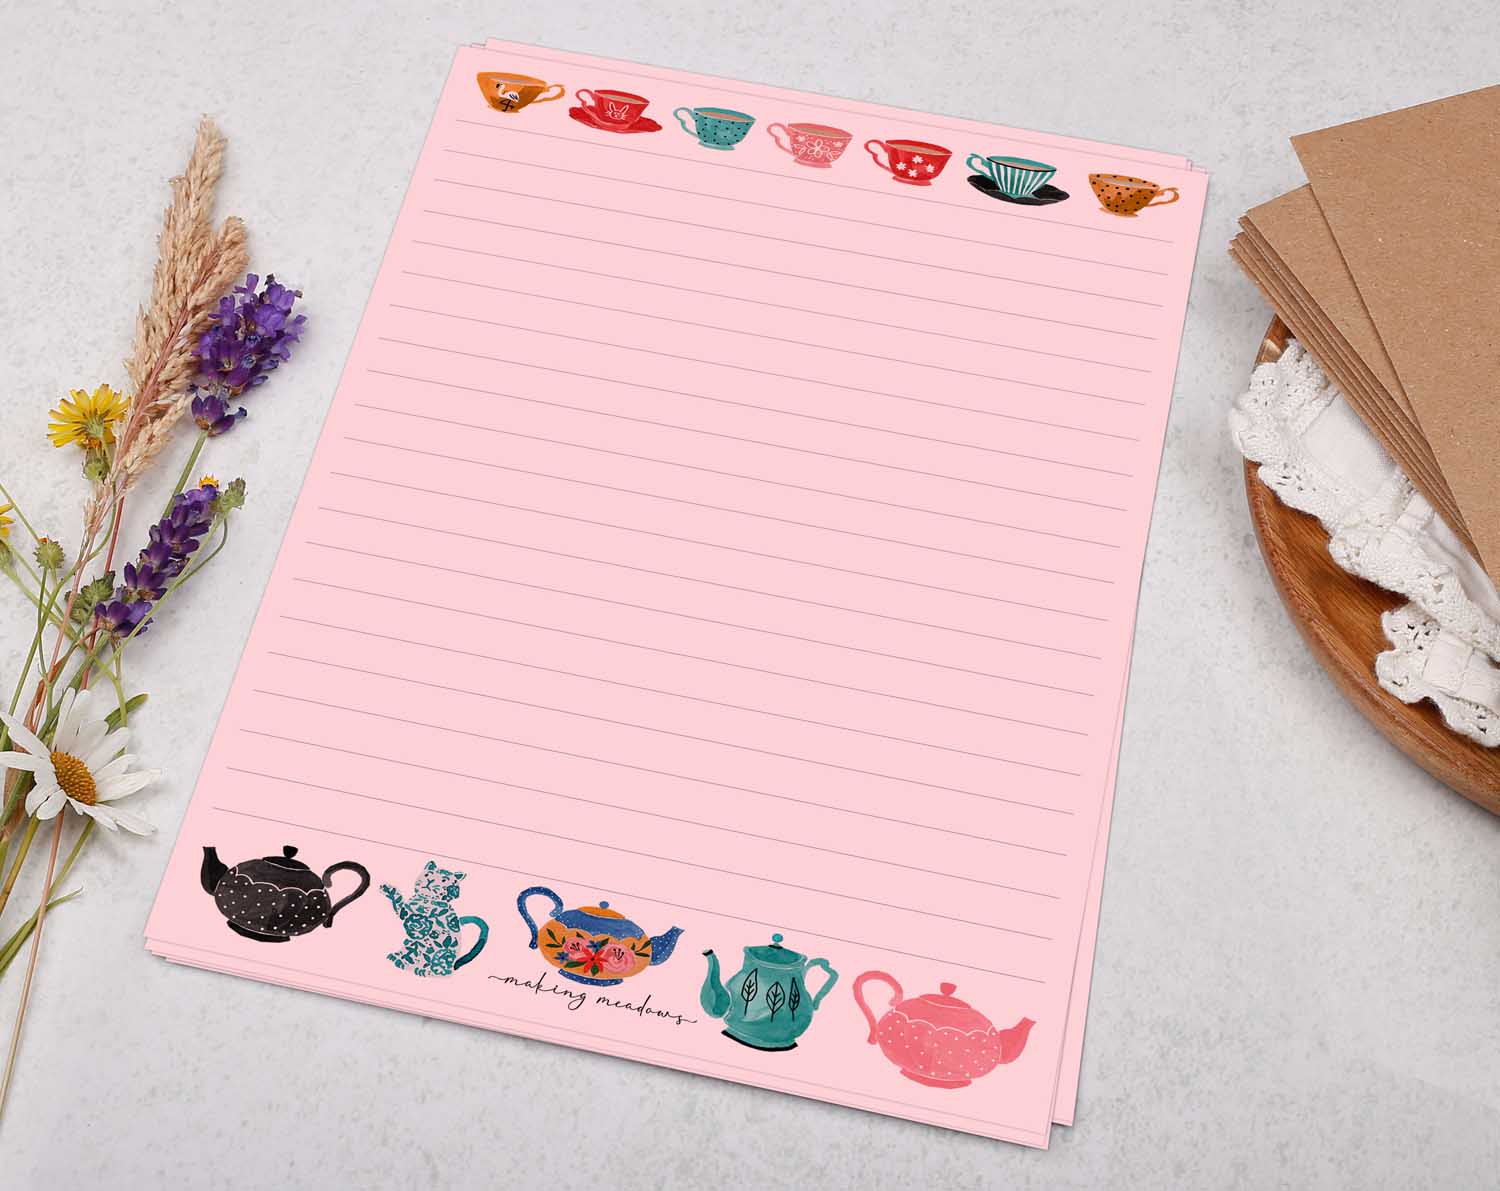 Pink A5 letter writing paper sheets adorned with vintage teapots or teacups.